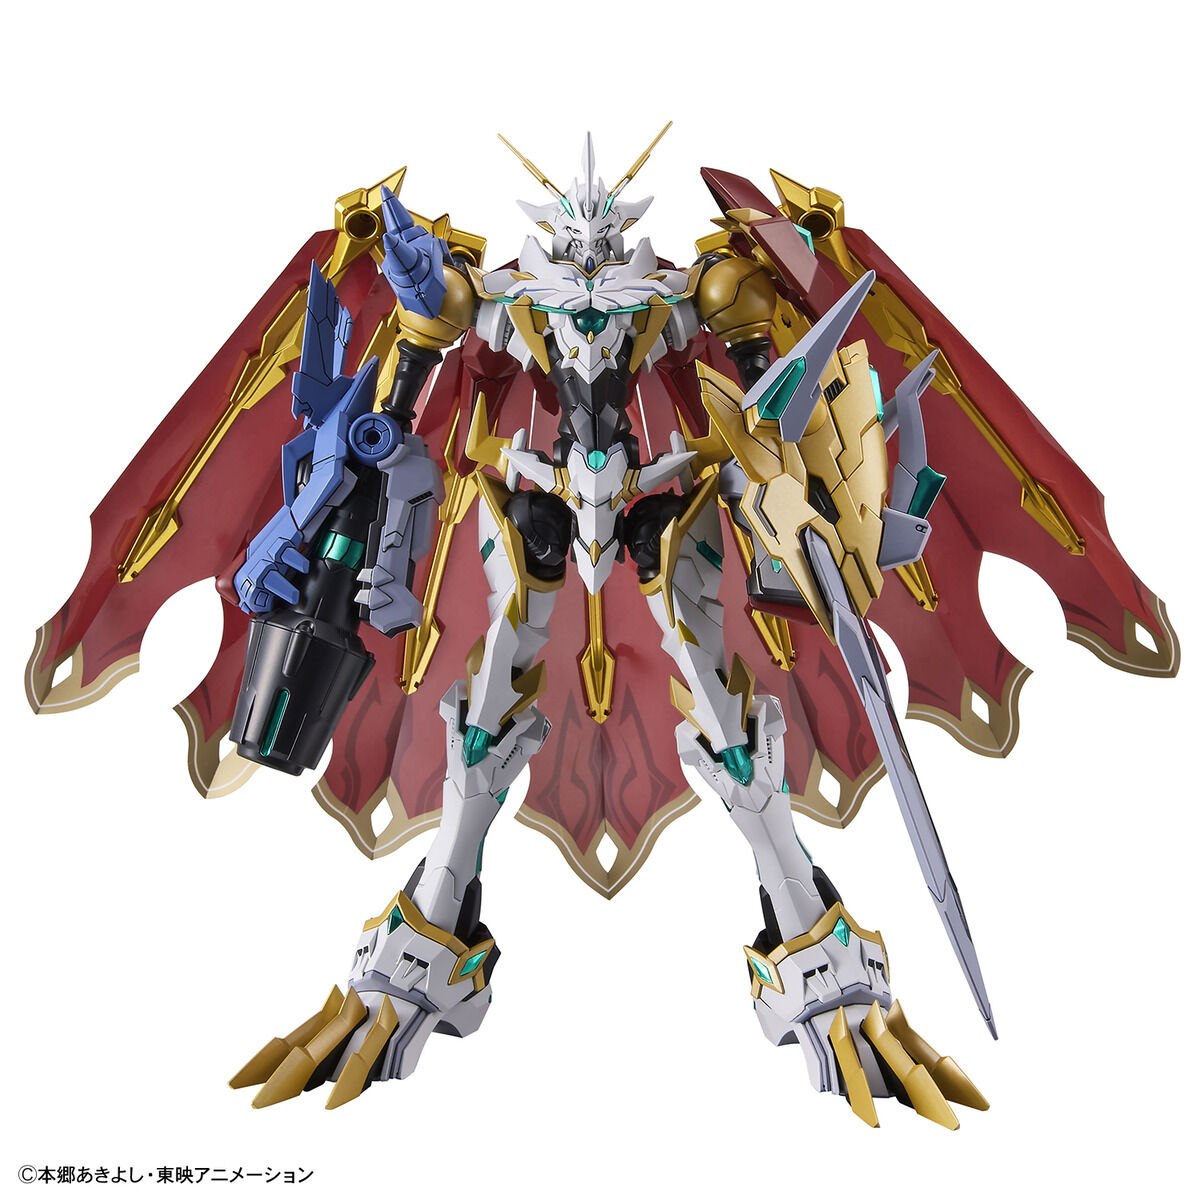 From 'Digimon Adventure', Omnimon appears in the Figure-rise Standard Amplified series.